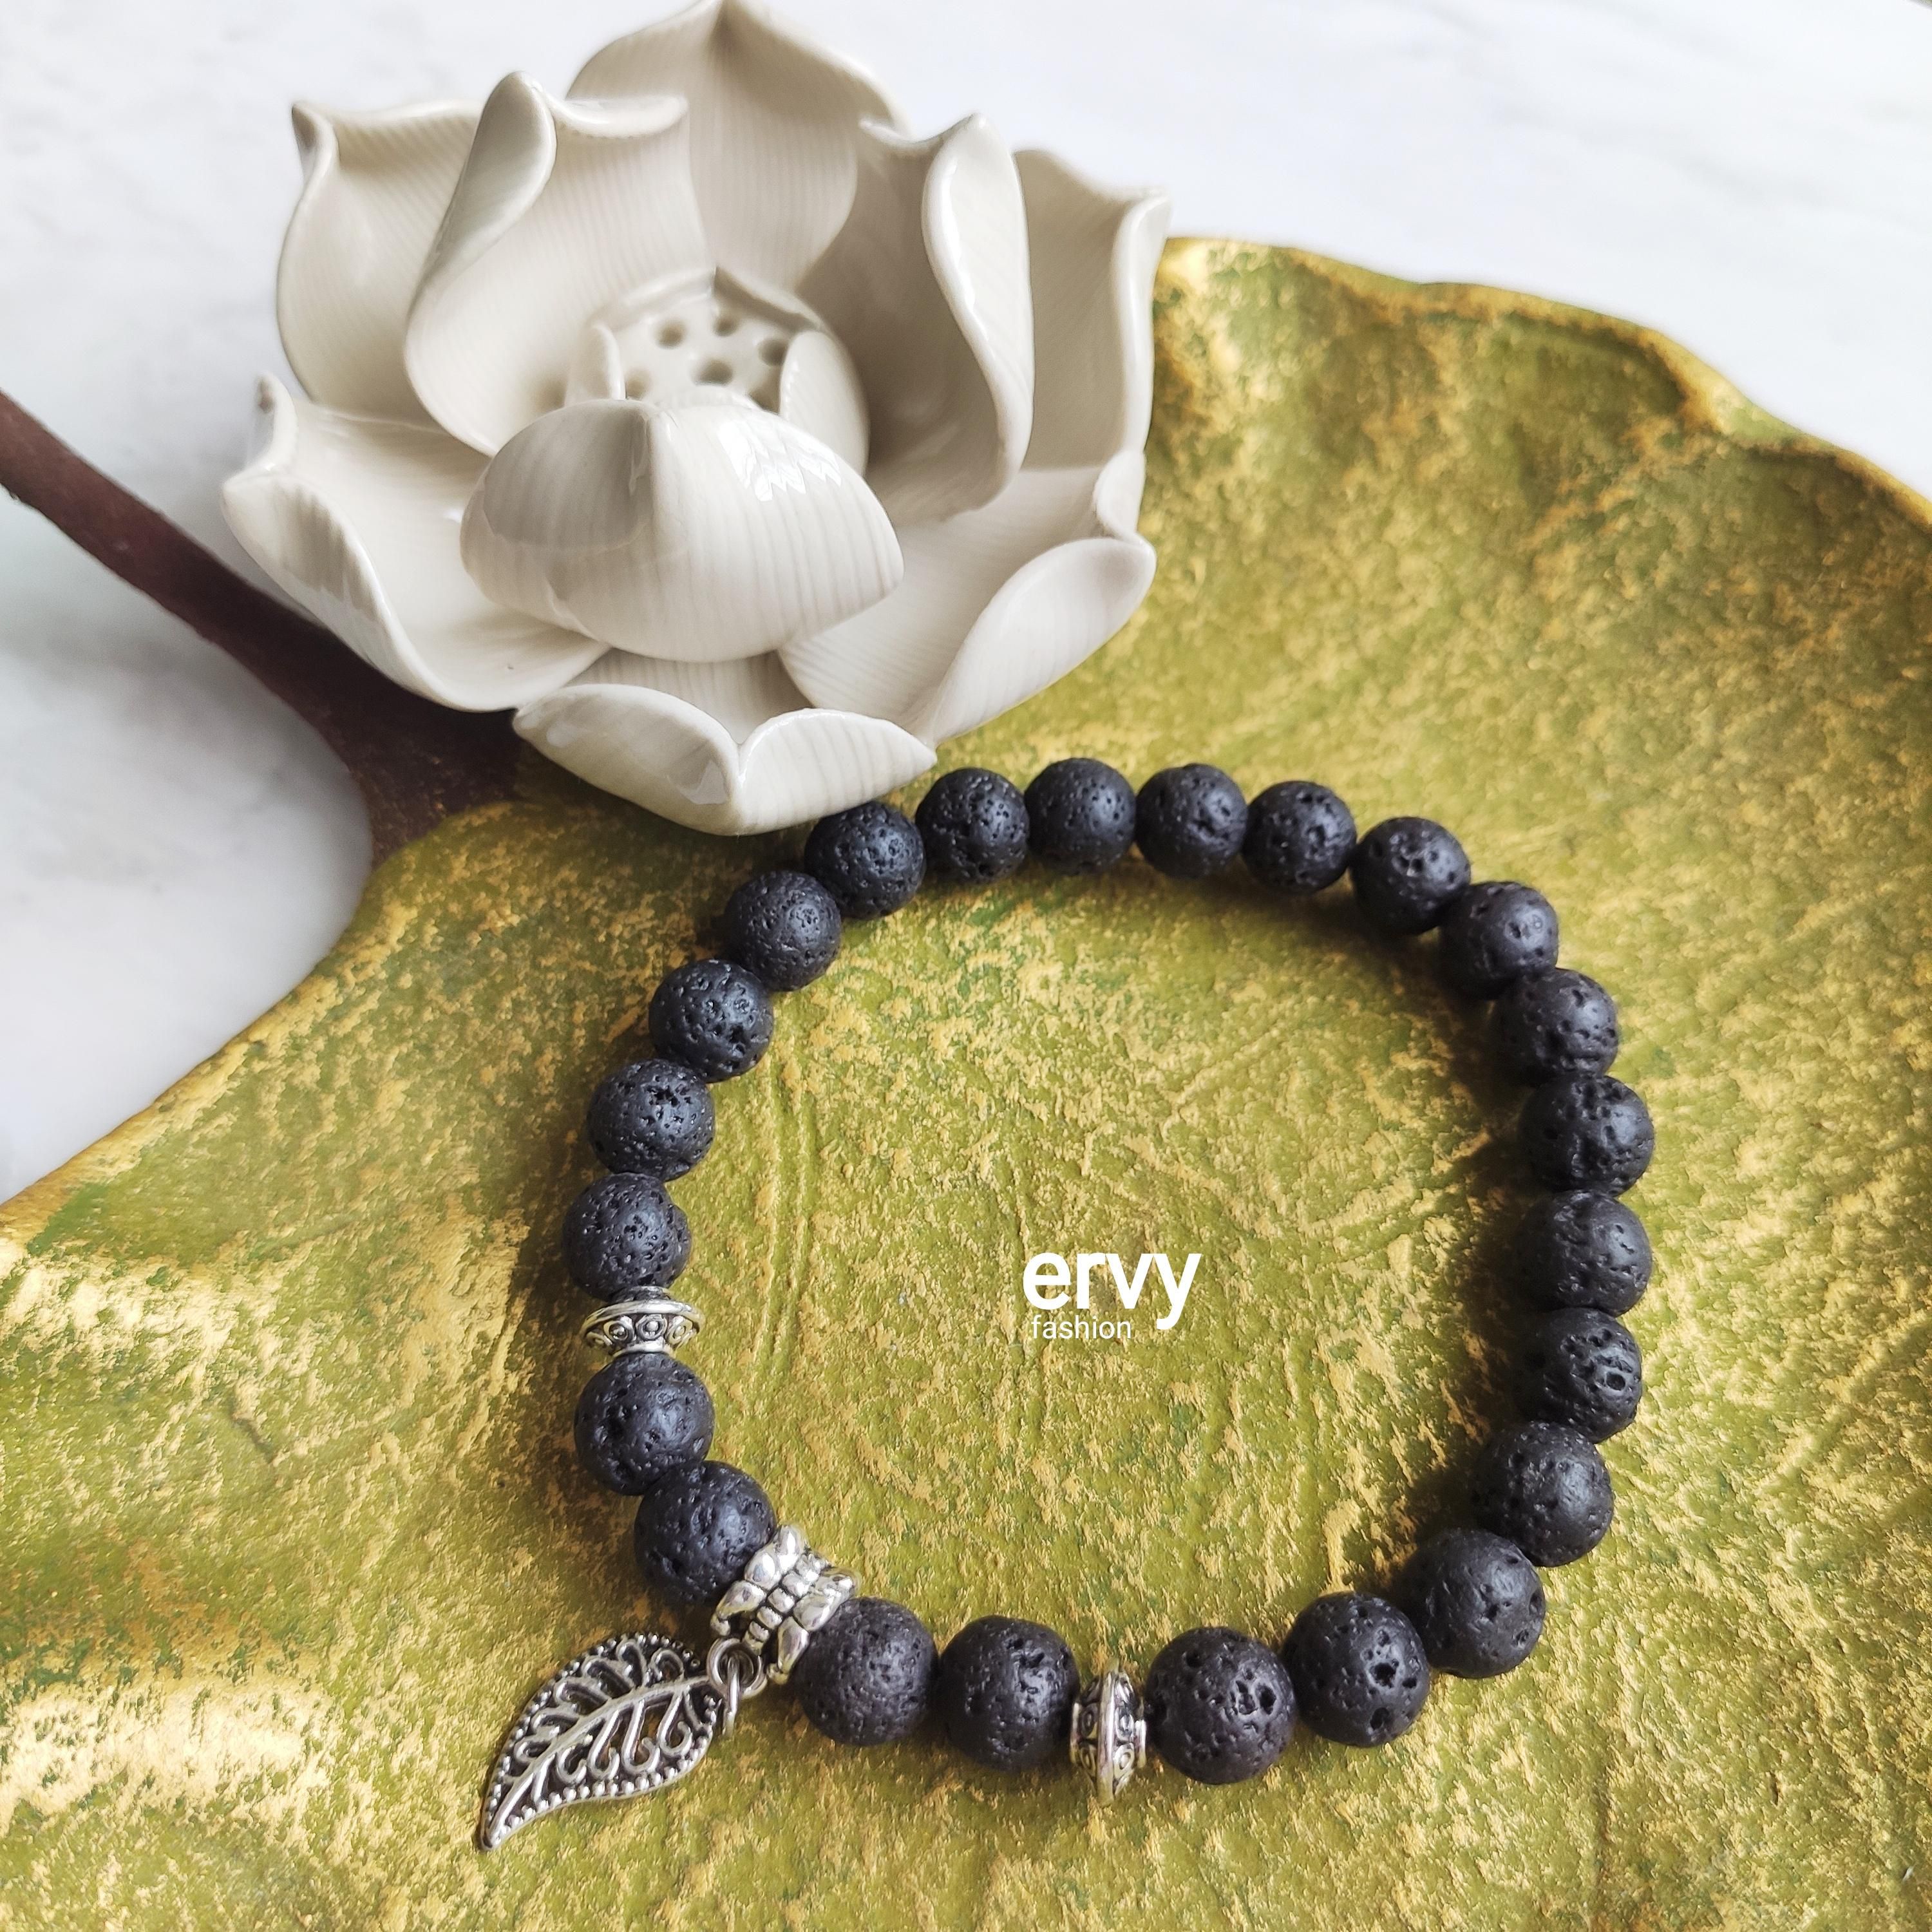 ERﹾ Bracelet Handcrafted Natural Lava Stone Diffuser Healing Beaded Design with Silver Plated Leaf Pendant